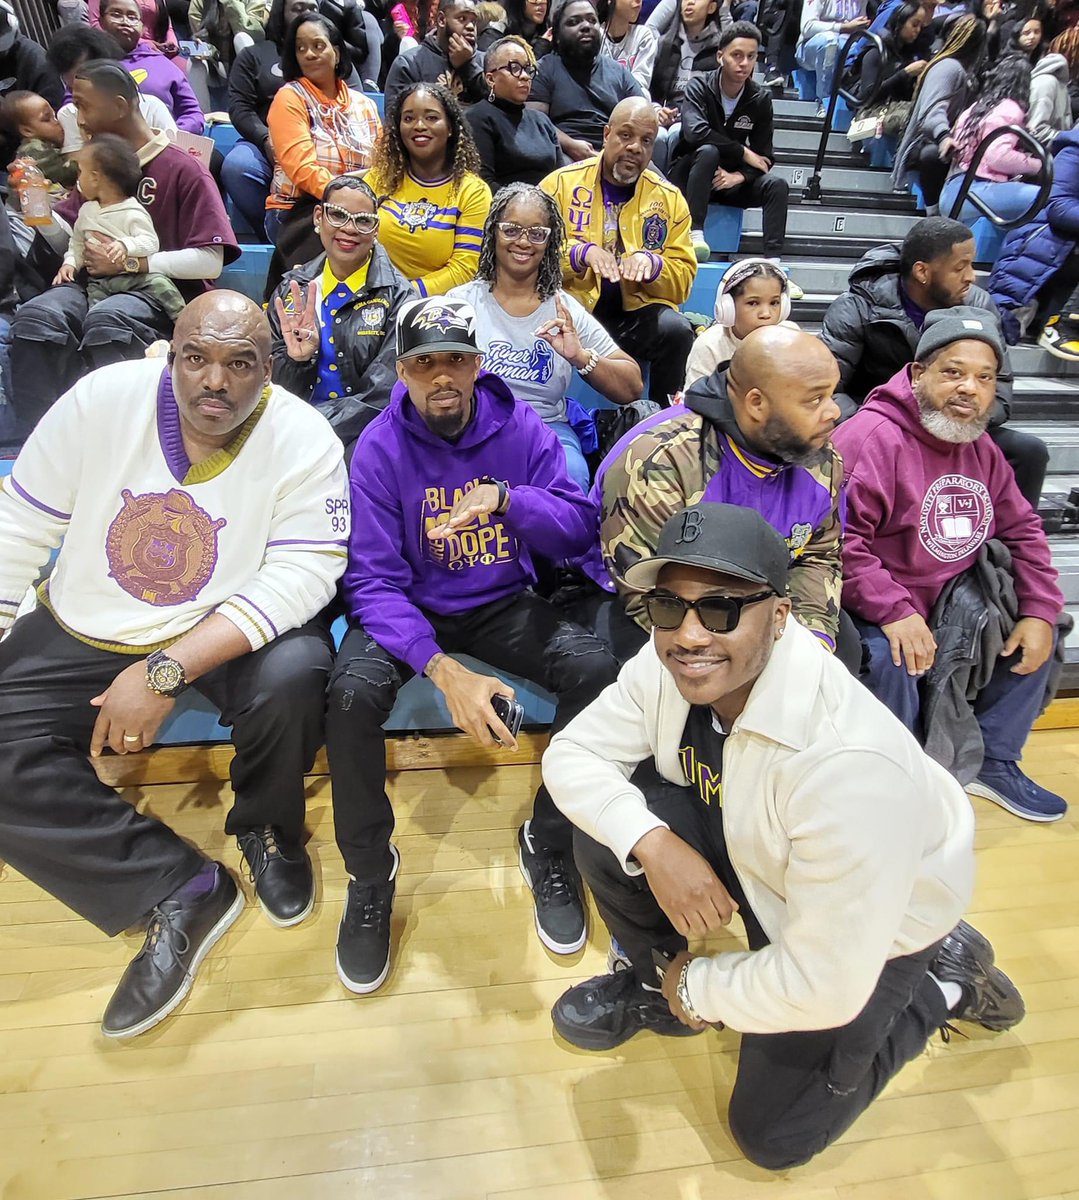 Last night, members of the CDAC NPHC supported the Delaware State University Men's basketball team as the took on Morgan State University. Support and service is what we do

#CDACNPHC #KentCounty #SussexCounty #APhiA #AKA #OPP #KAY #DST #PBS #ZPhiB #SGRho #IPhiT